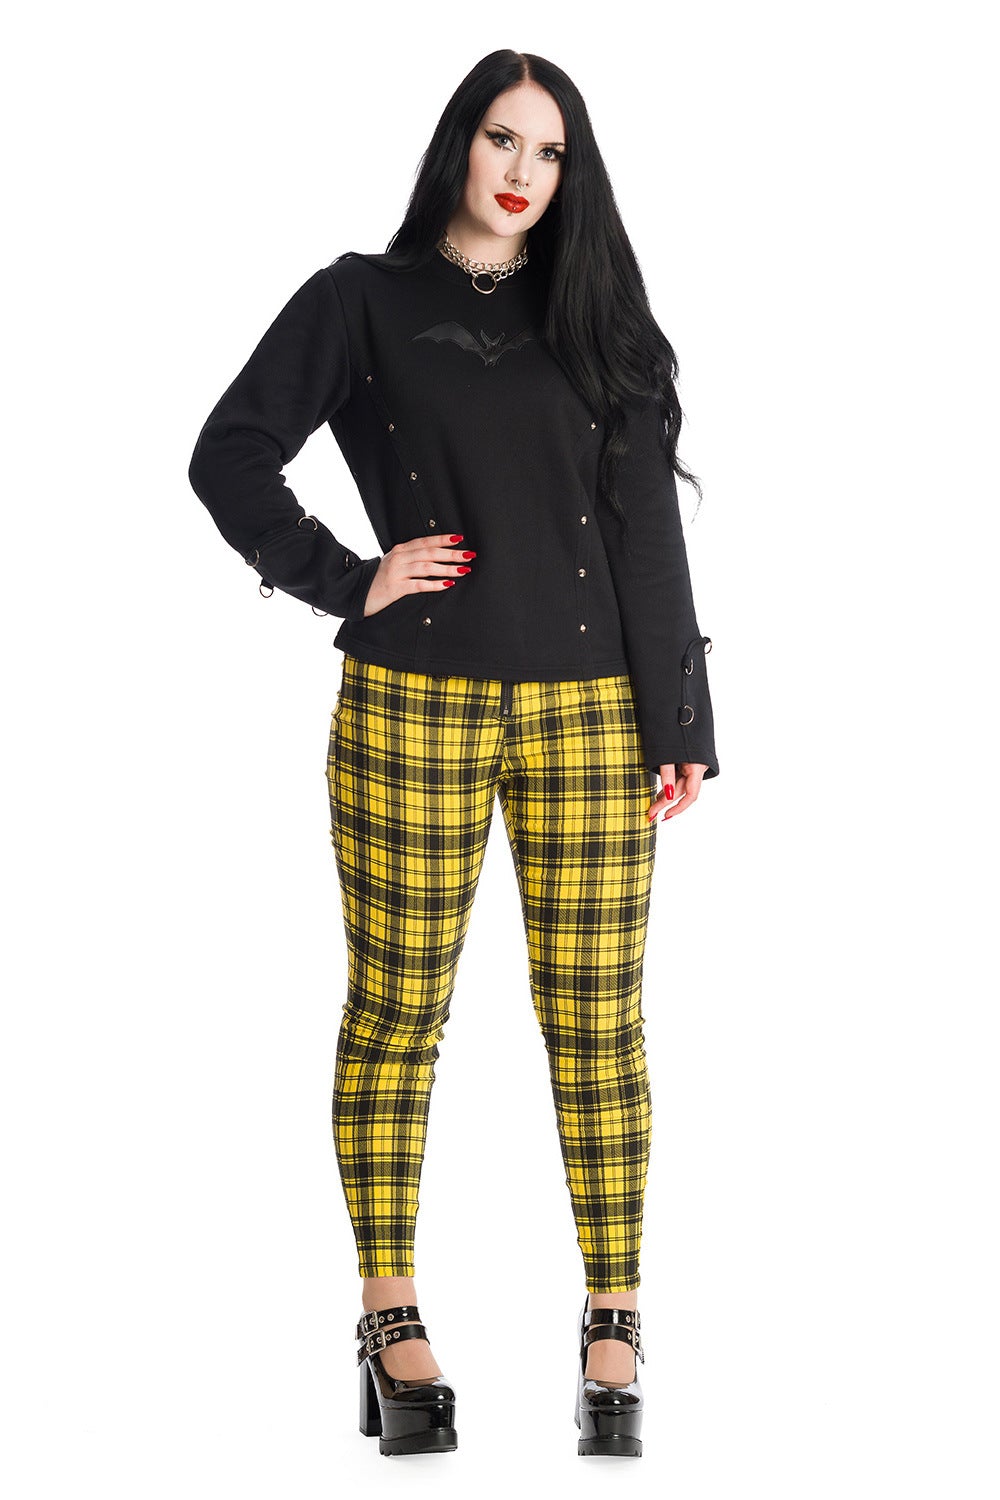 Alternative model wearing high waisted yellow check trousers with pentagram zip details. 